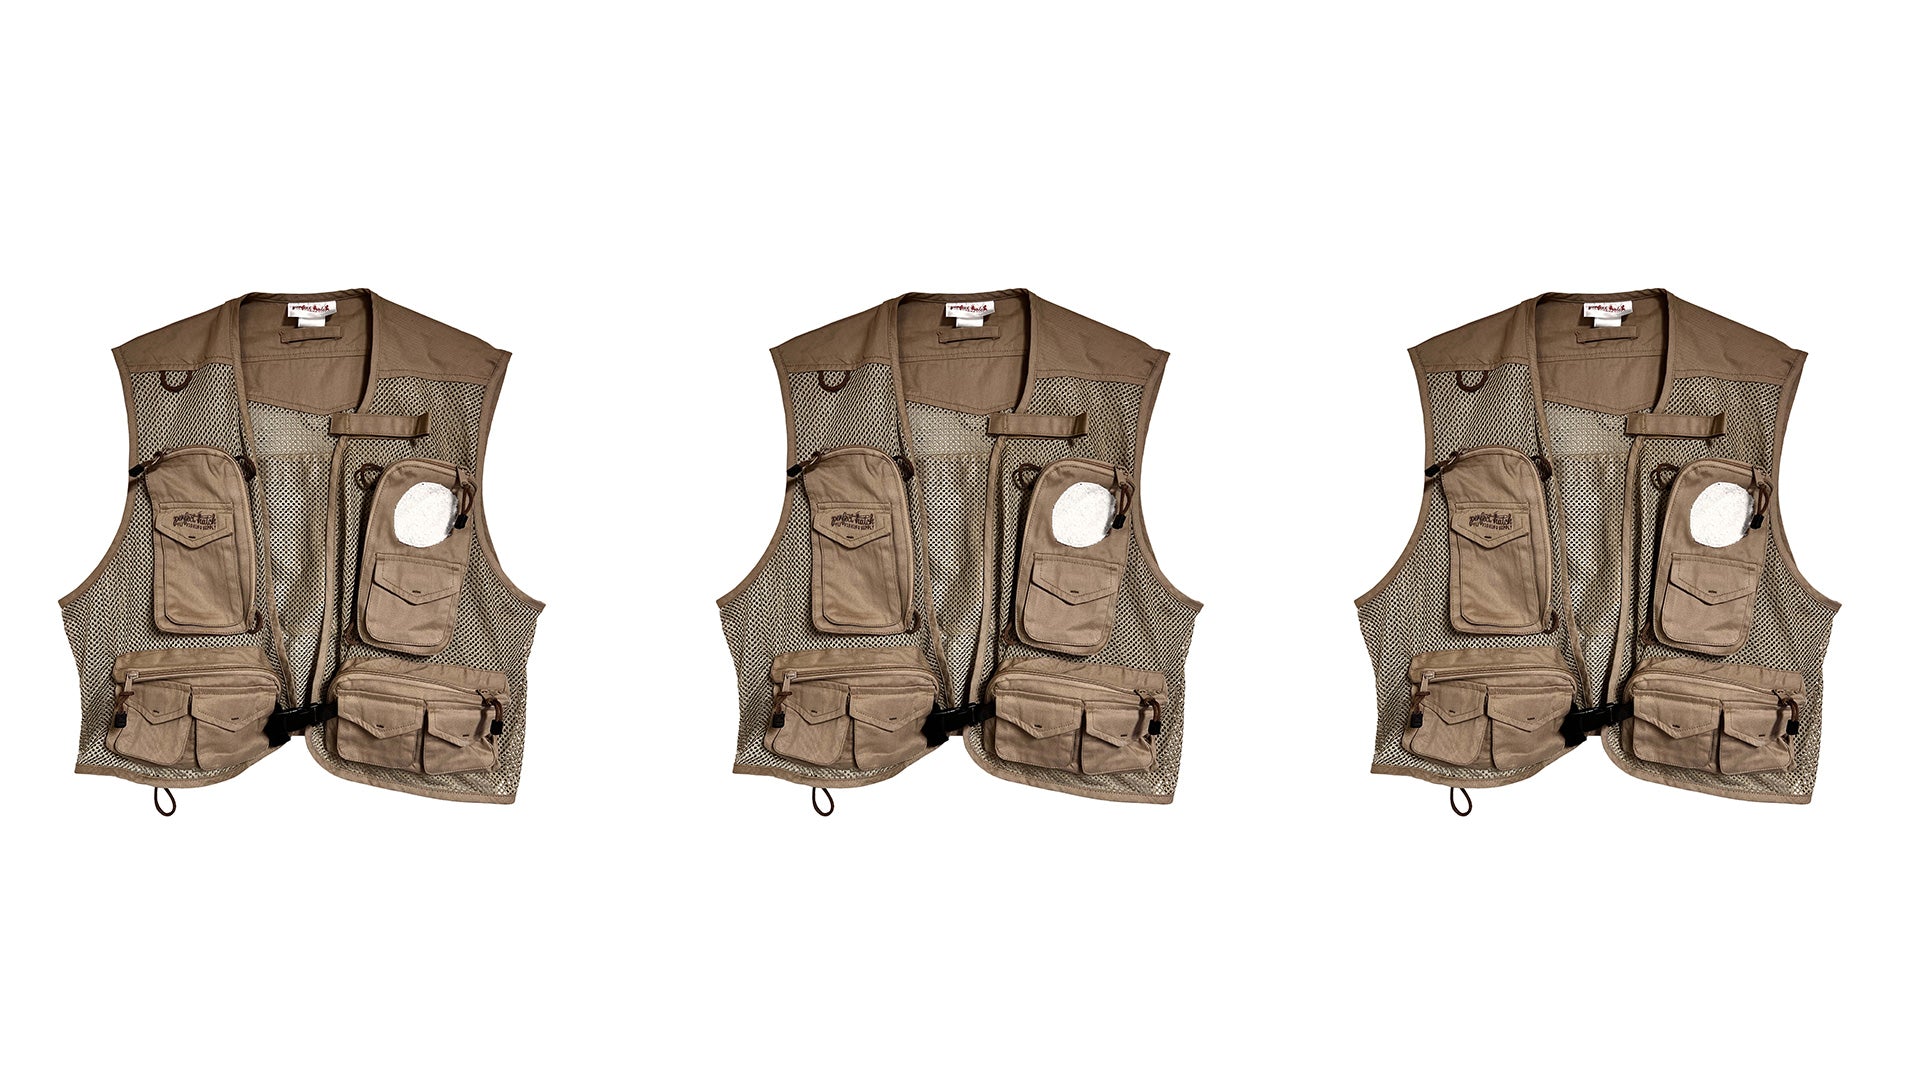 Perfect Fly Slough Creek Fly Fishing Vest and Backpack - The Perfect Fly  Store